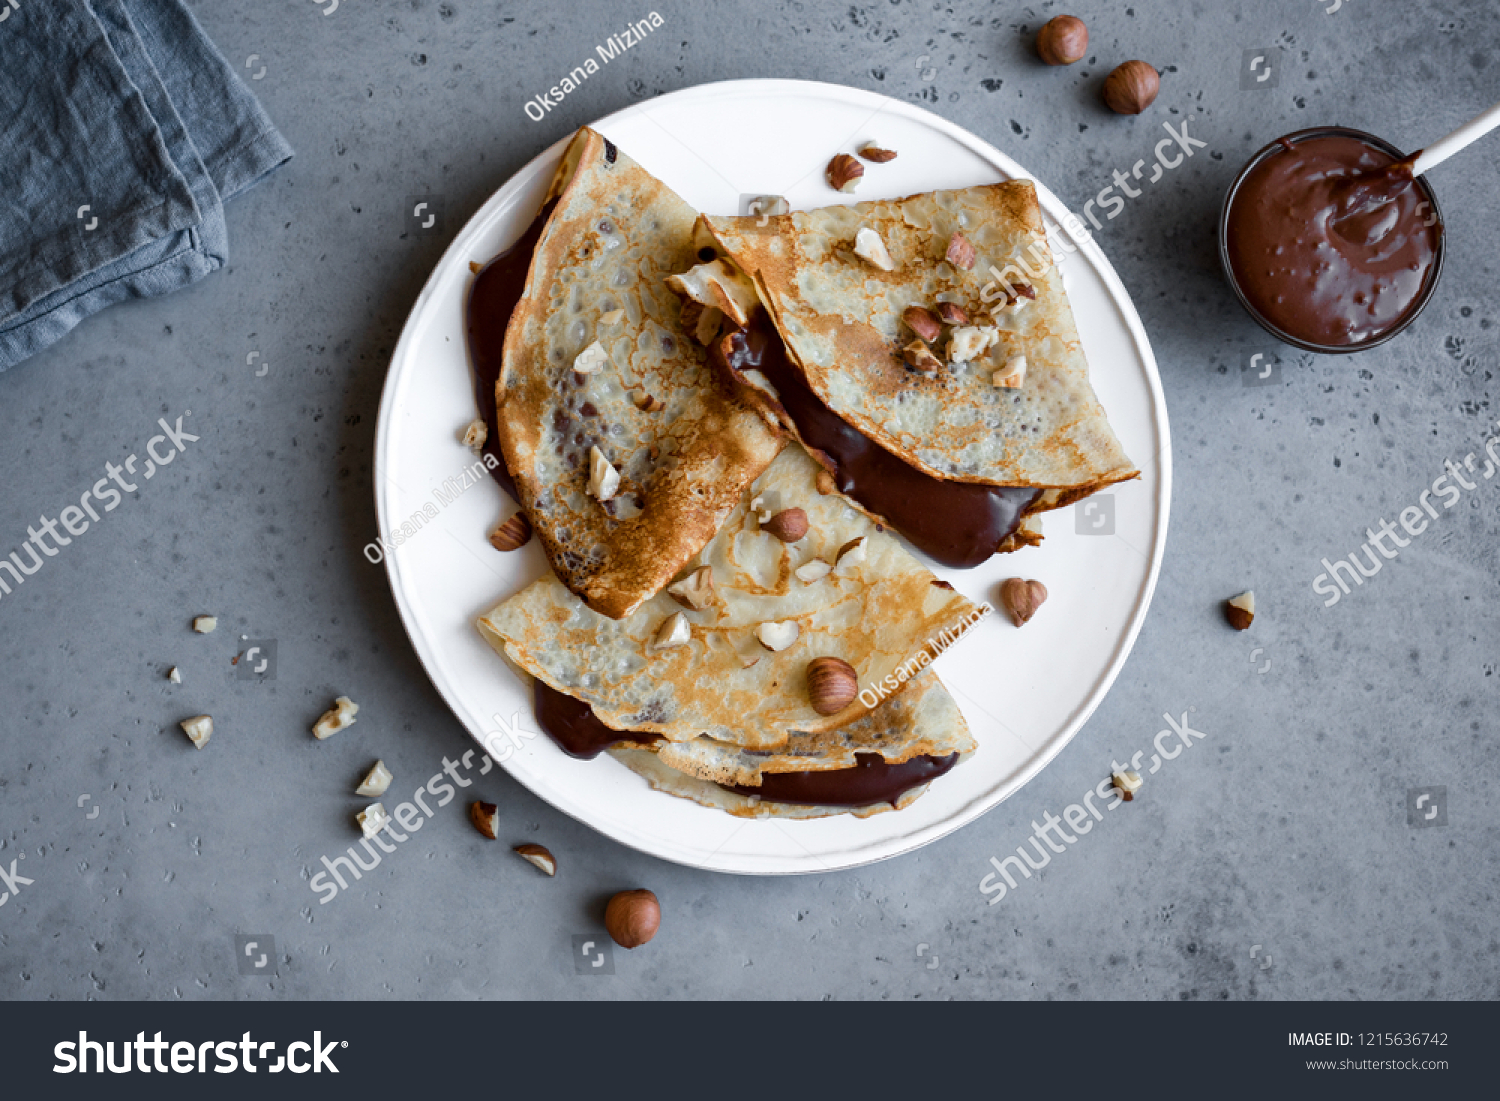 Crepes with chocolate spread and hazelnuts. Homemade thin crepes for breakfast or dessert. #1215636742